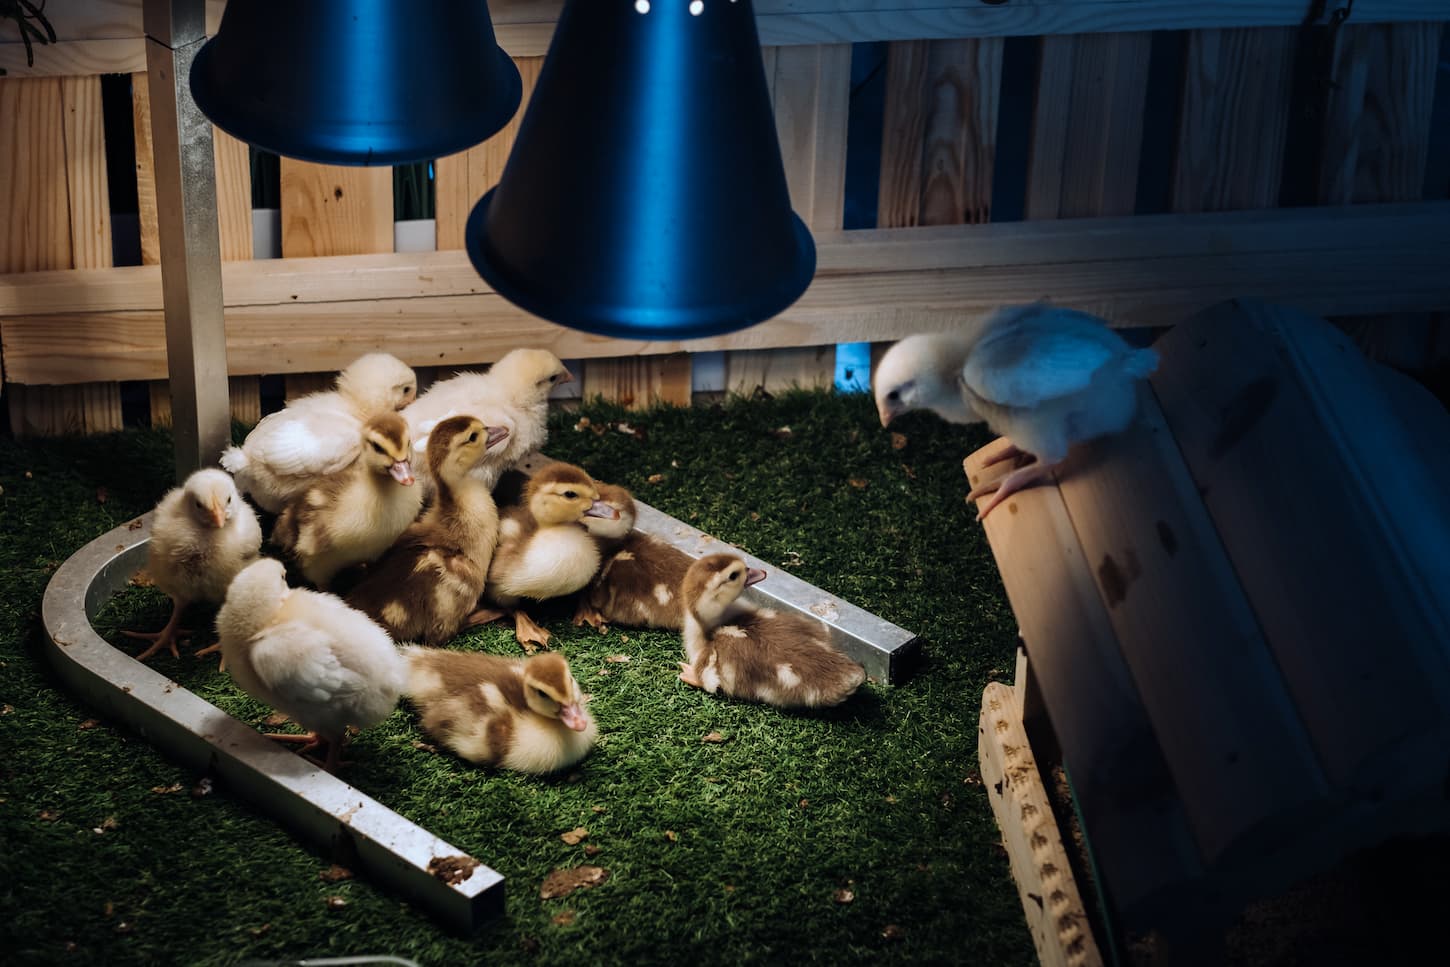 An image of Small chickens and ducklings basking on the grass under a lamp in the yard.